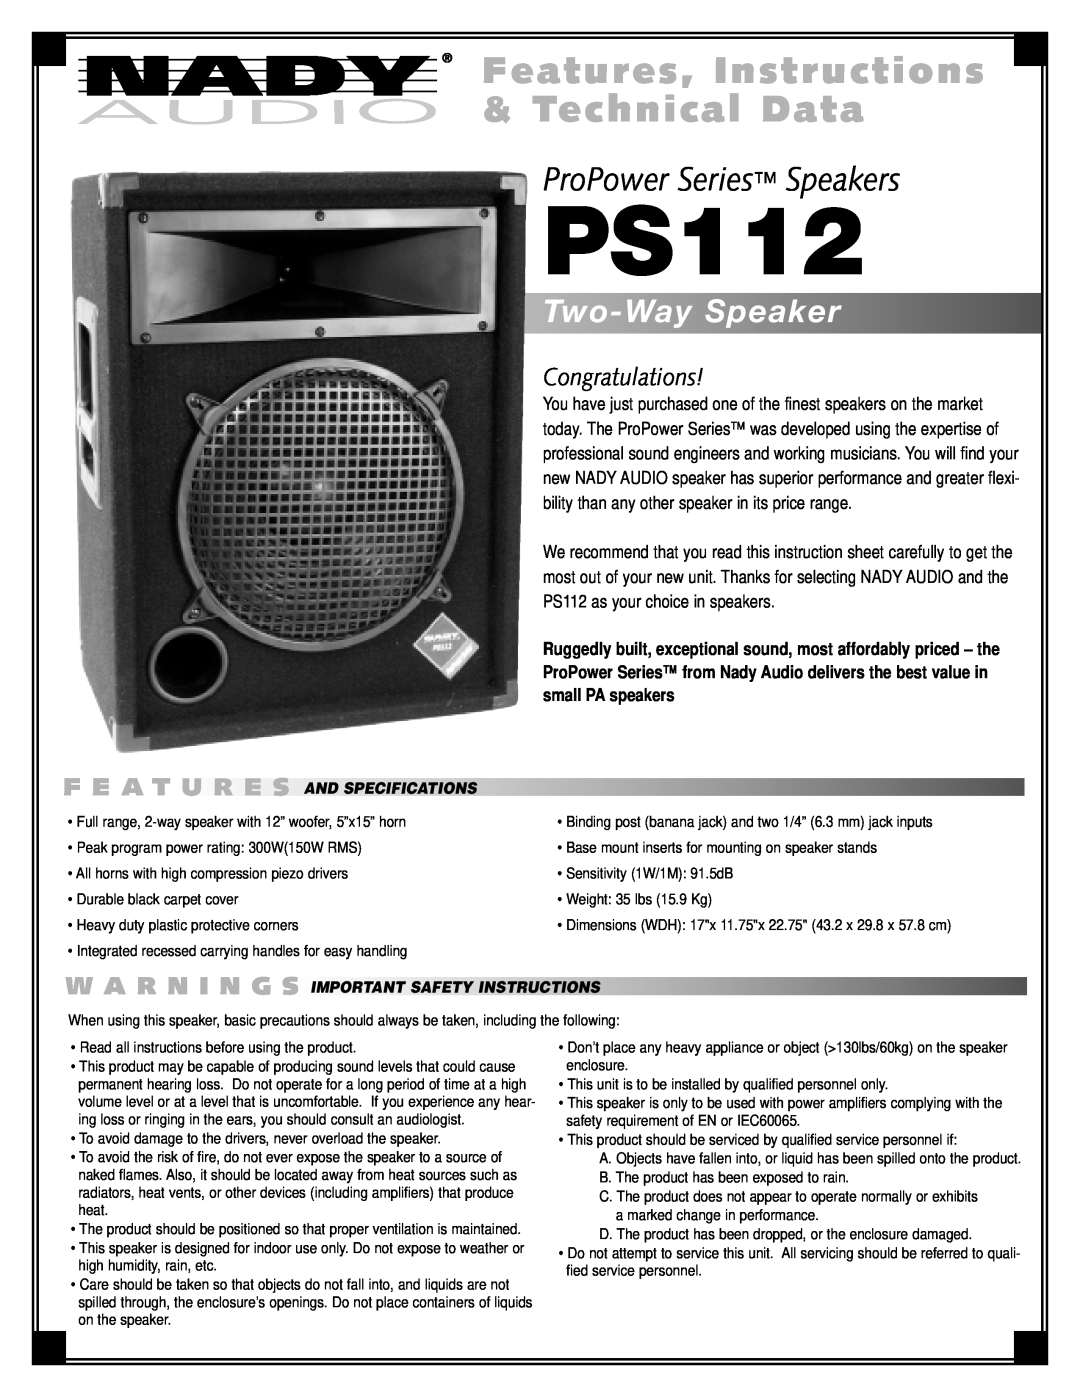 Nady Systems PS112 important safety instructions F E A T Ures, W A R N I N G S, Importantsafetyinstructions 